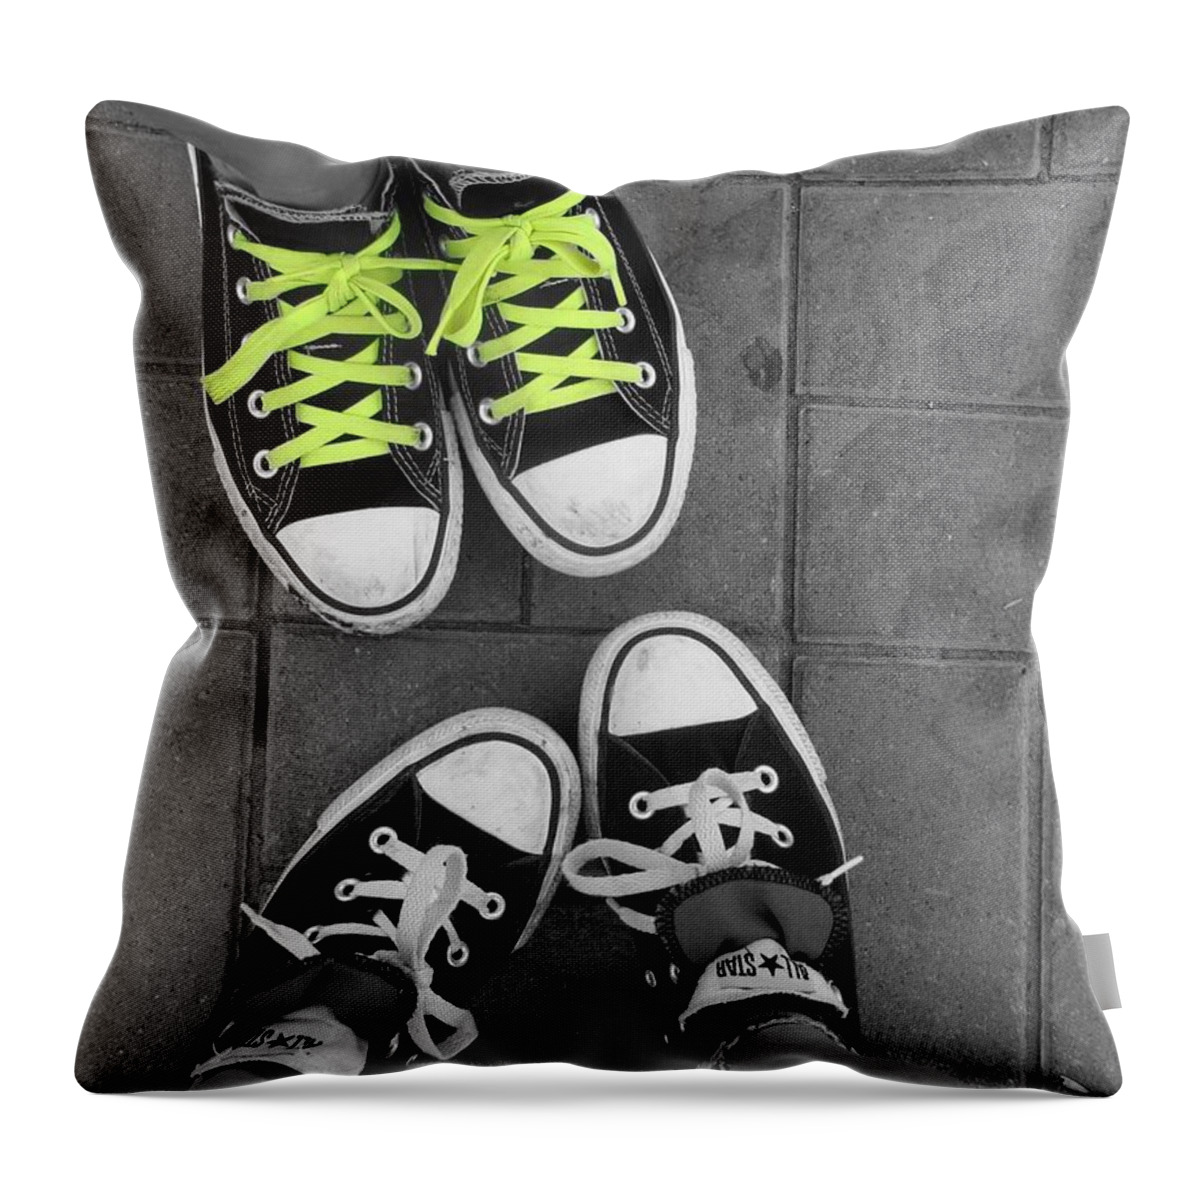 Converse Throw Pillow featuring the photograph Converse by Leah Mihuc